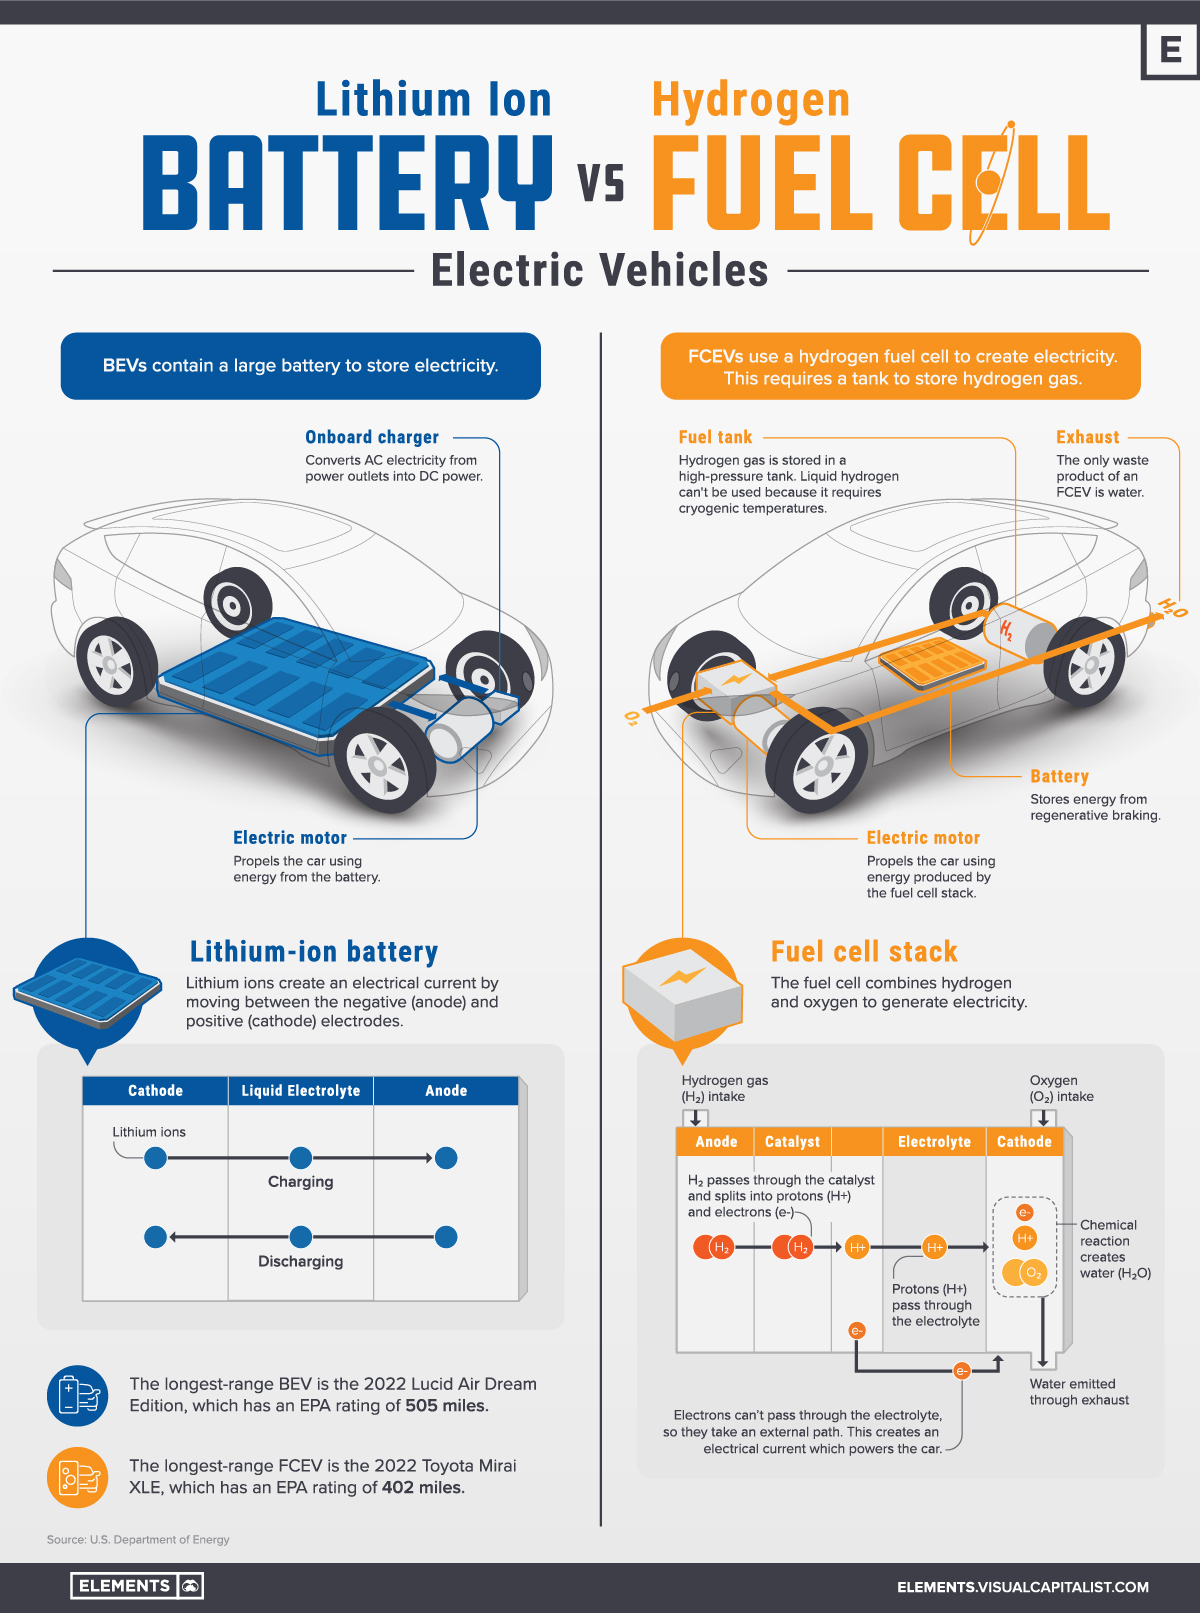 Comparing Hydrogen Fuel Cell Vehicles and Electric Vehicles